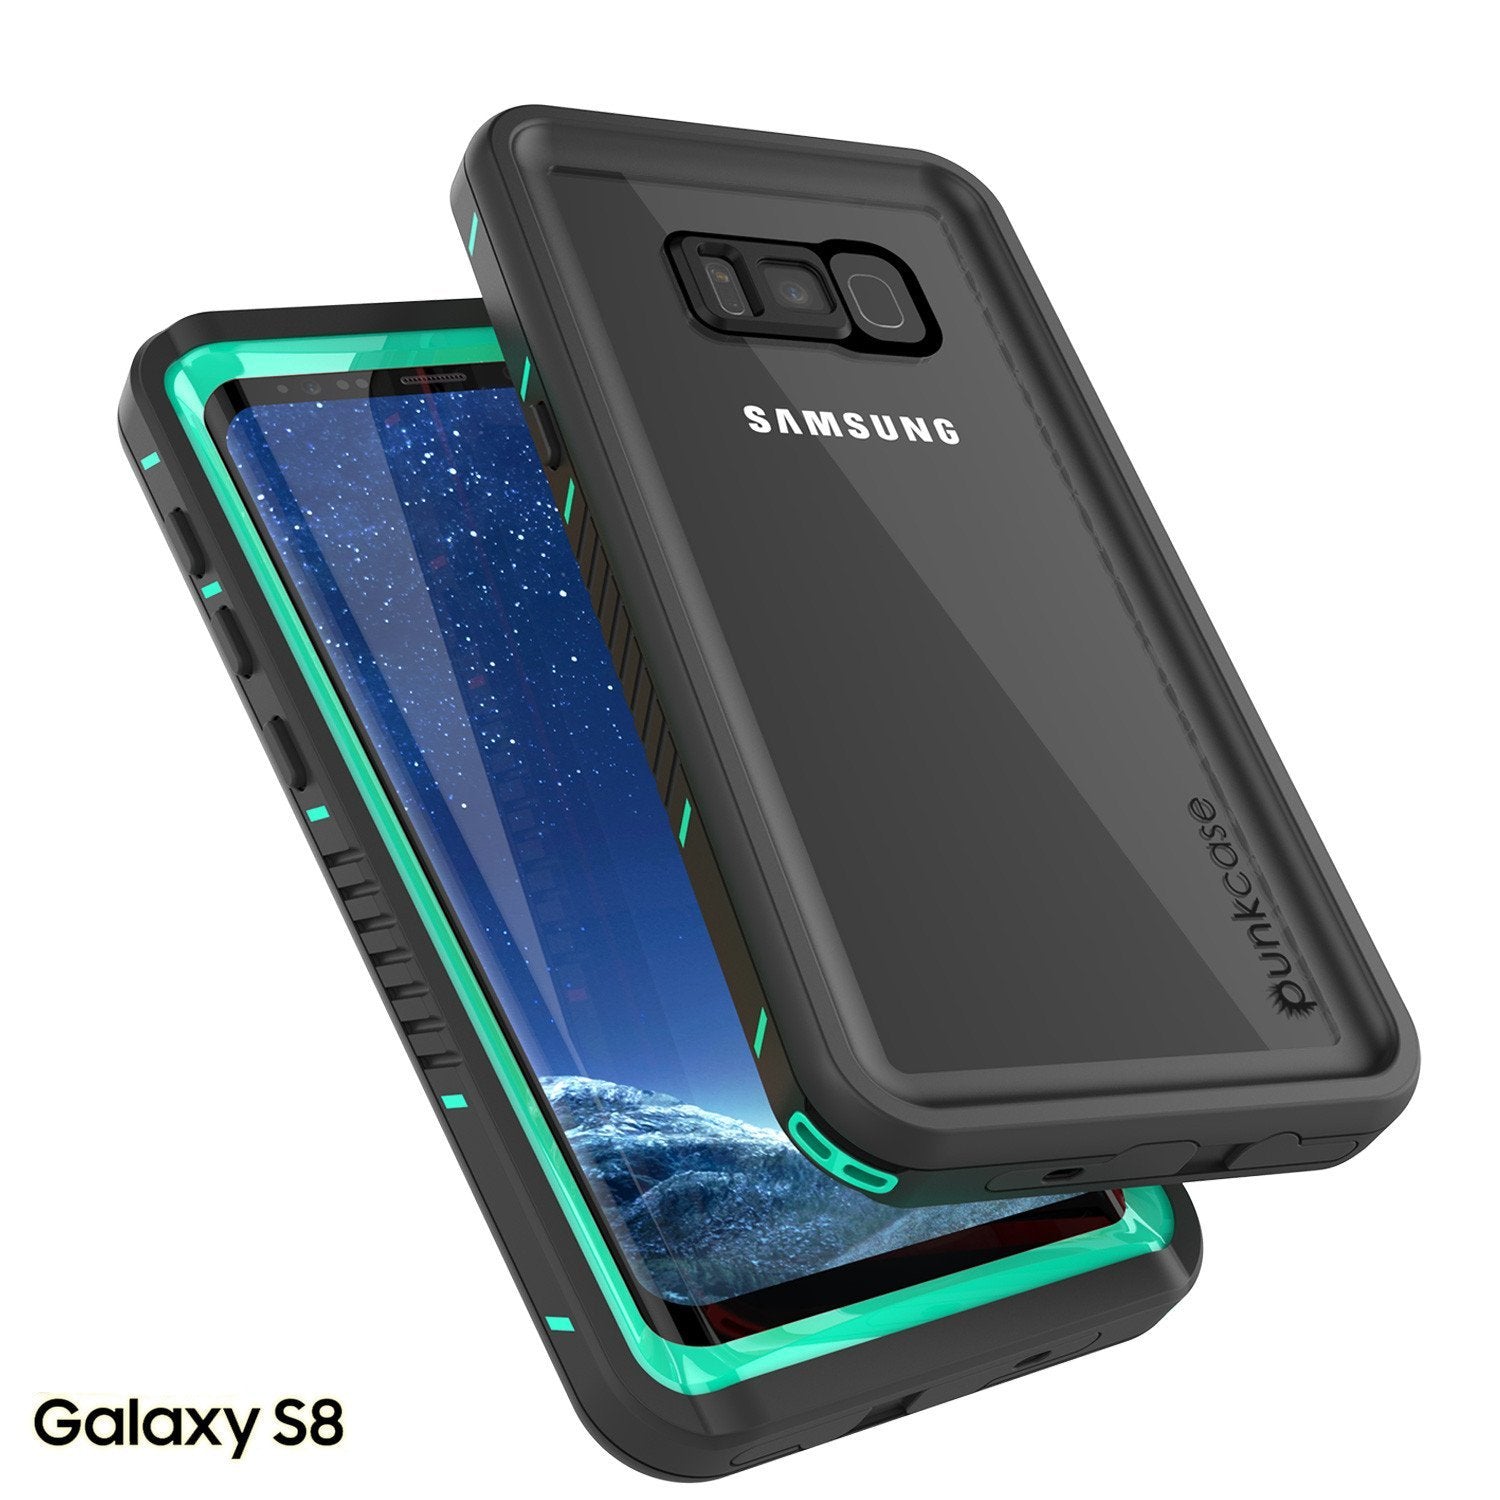 Galaxy S8 PLUS Waterproof Case, Punkcase [Extreme Series] Slim Fit, Armor Cover W/ Built In Screen Protector for Samsung Galaxy S8+ [Teal]